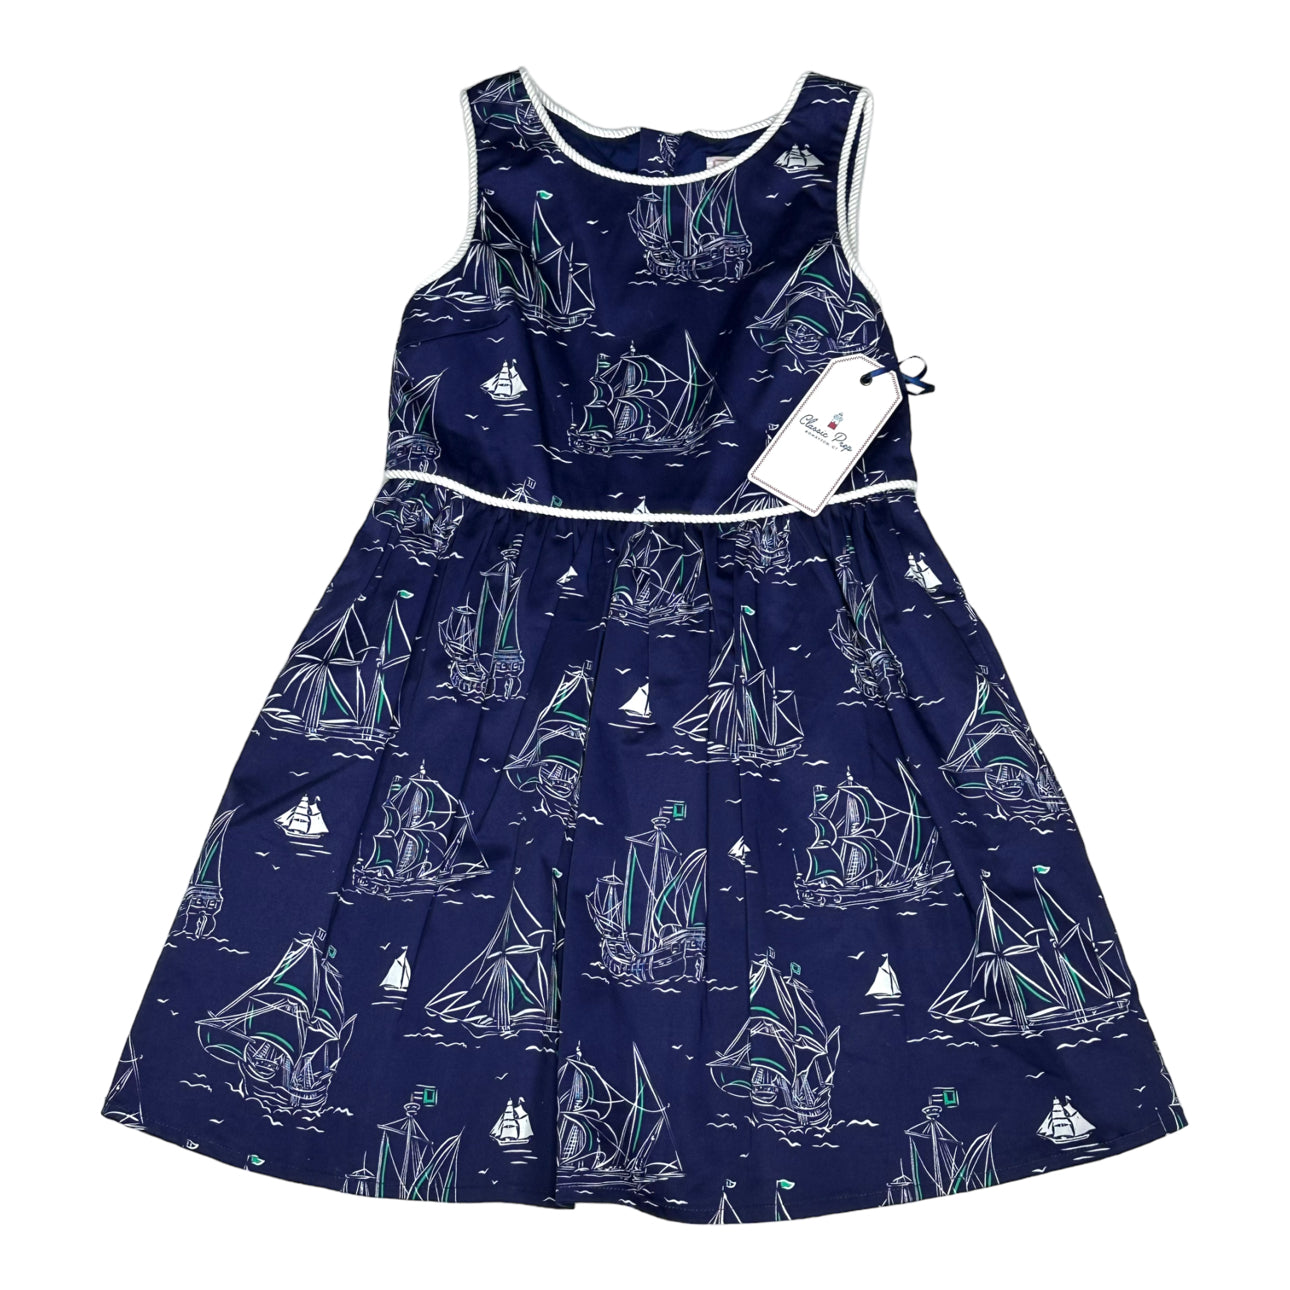 Rope Trim Ship Print Dress with Tags